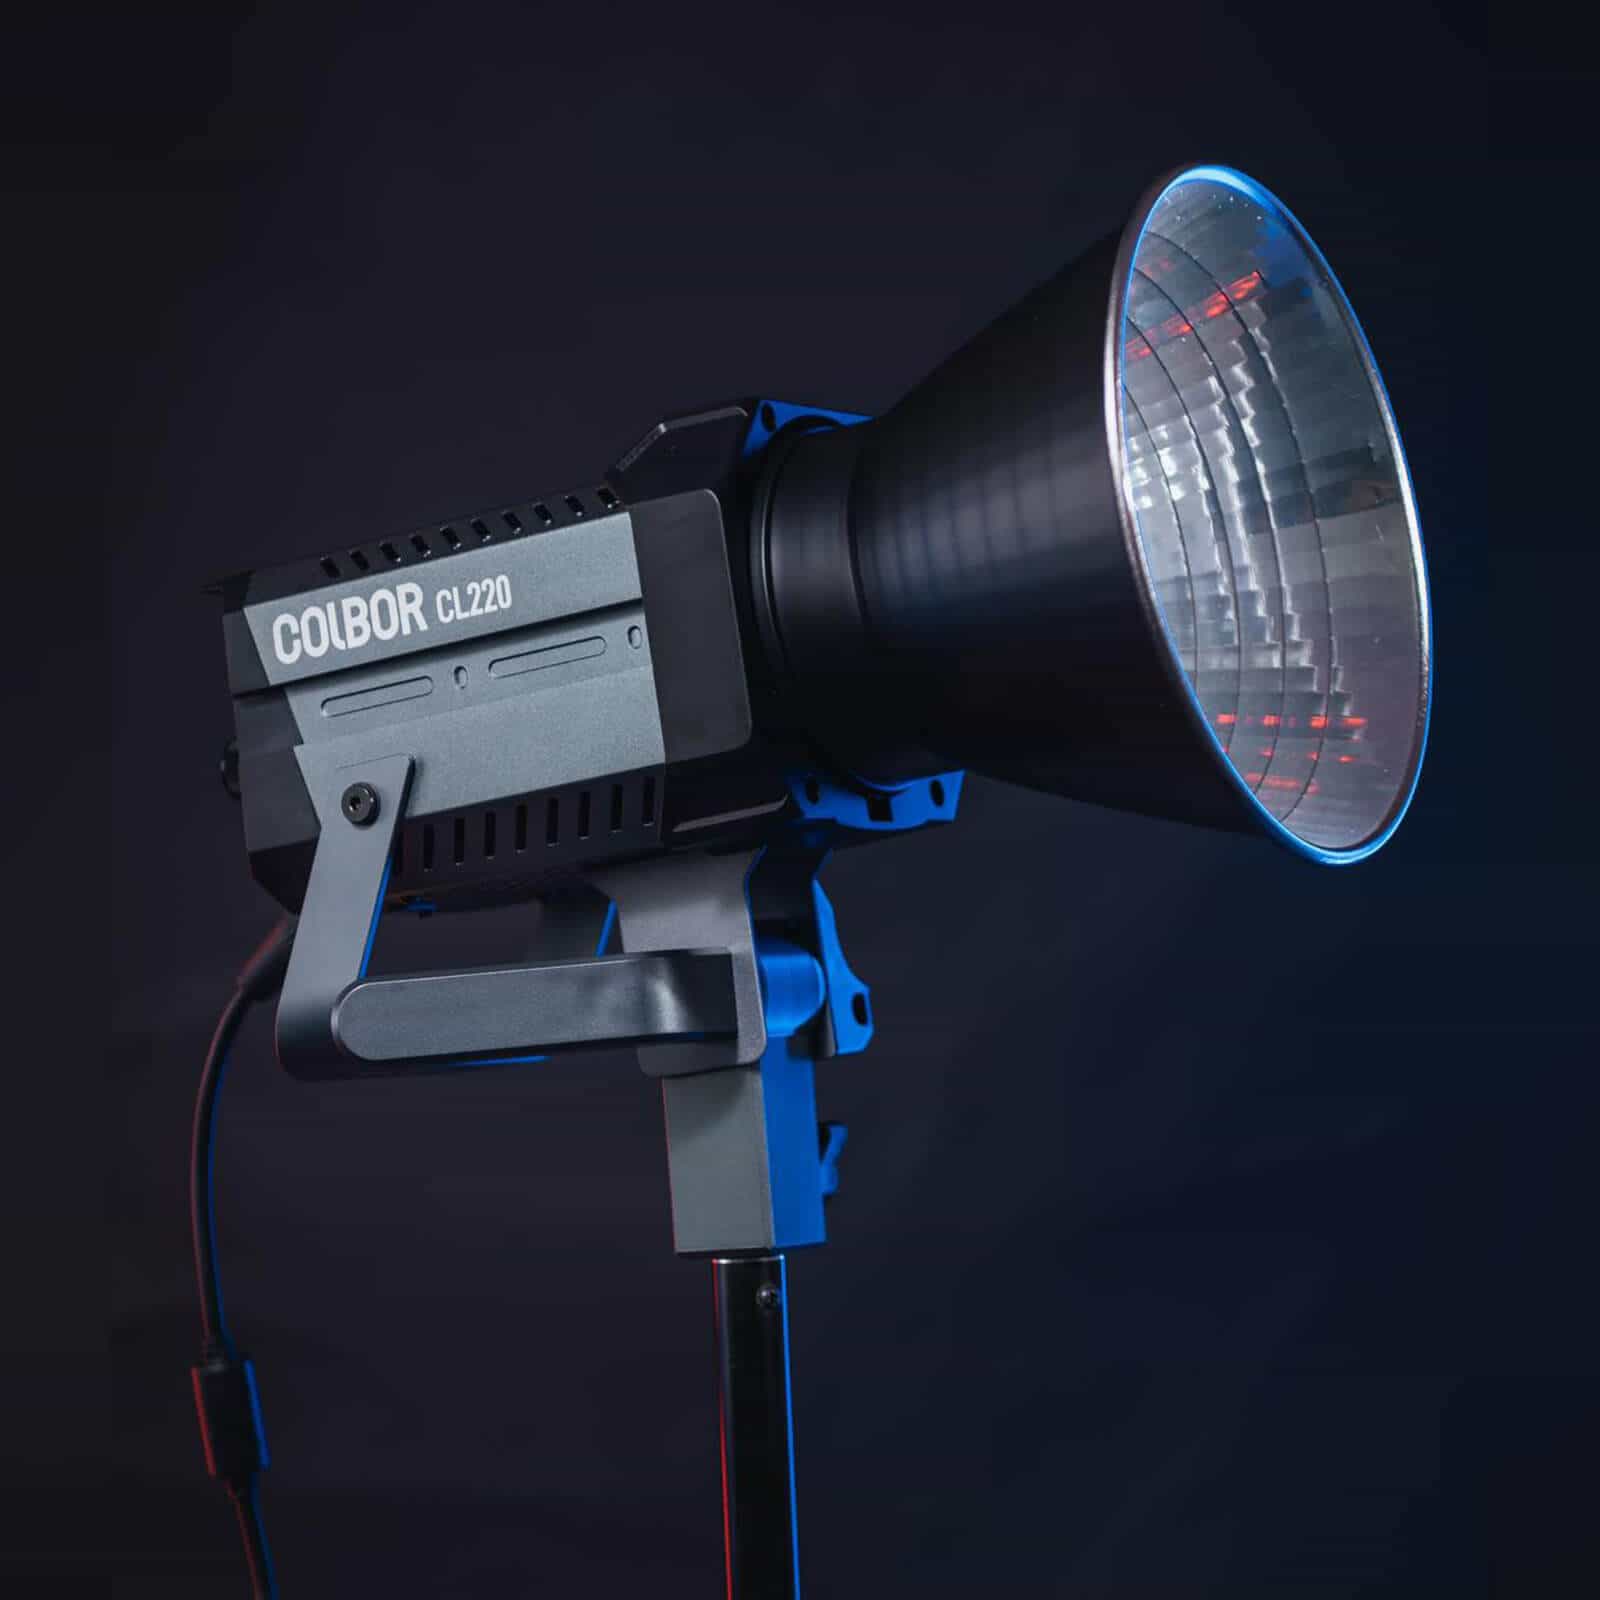 COLBOR BHR15 can be used with the COLBOR CL220 light.